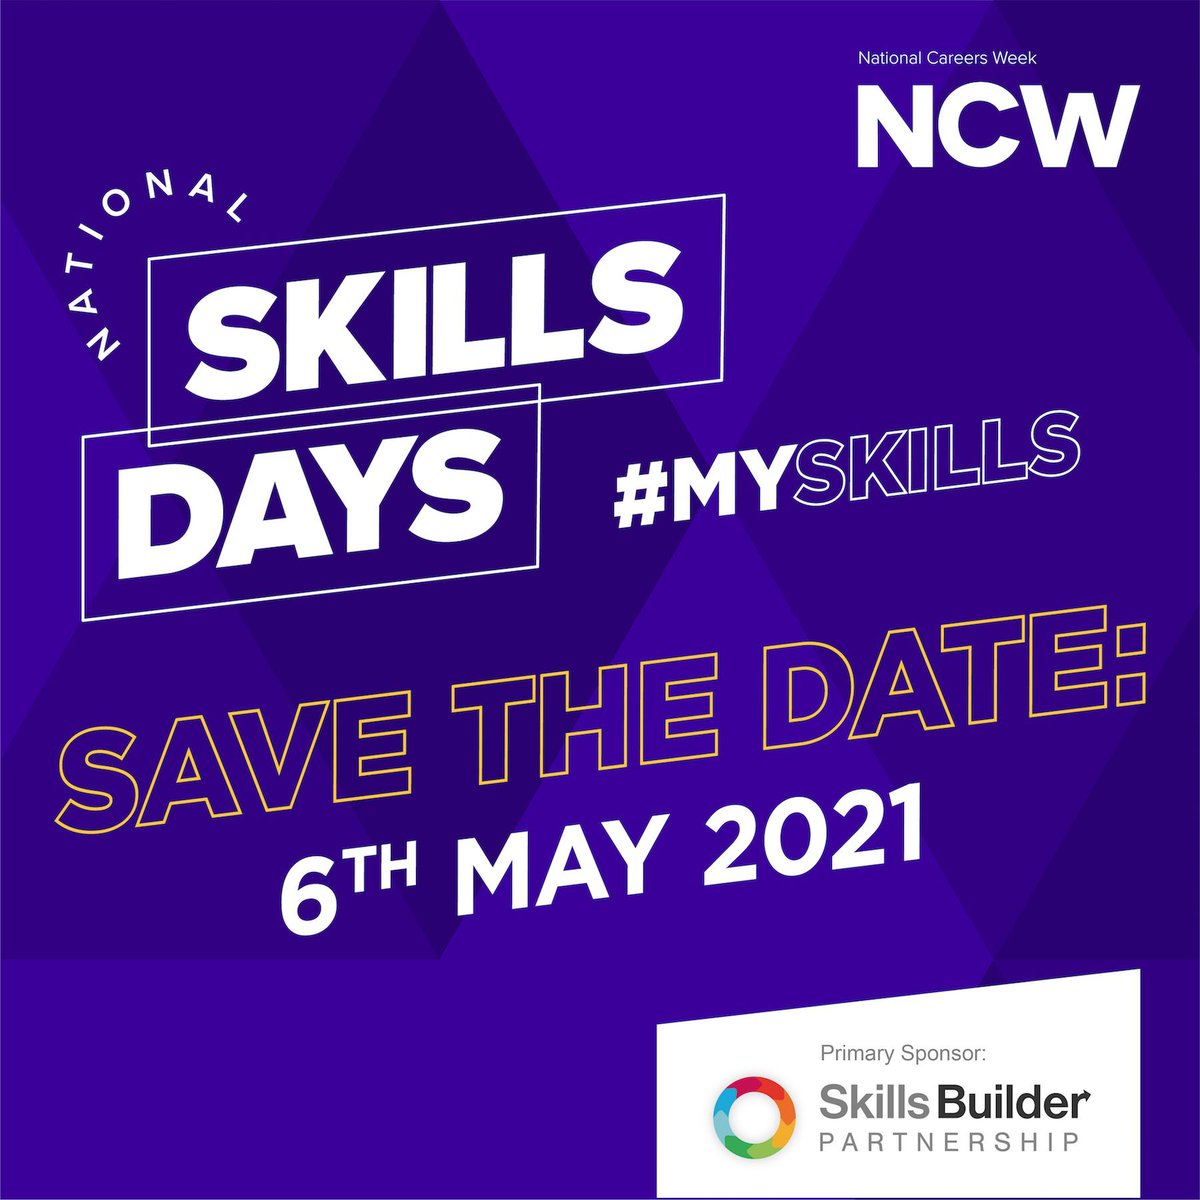 National Skills Days On Twitter The Next National Skills Days Takes Place Thursday 6th May 2021 In Partnership With Skills Builder Resources Coming This Week Myskills Https T Co Eggjct3g9i Twitter